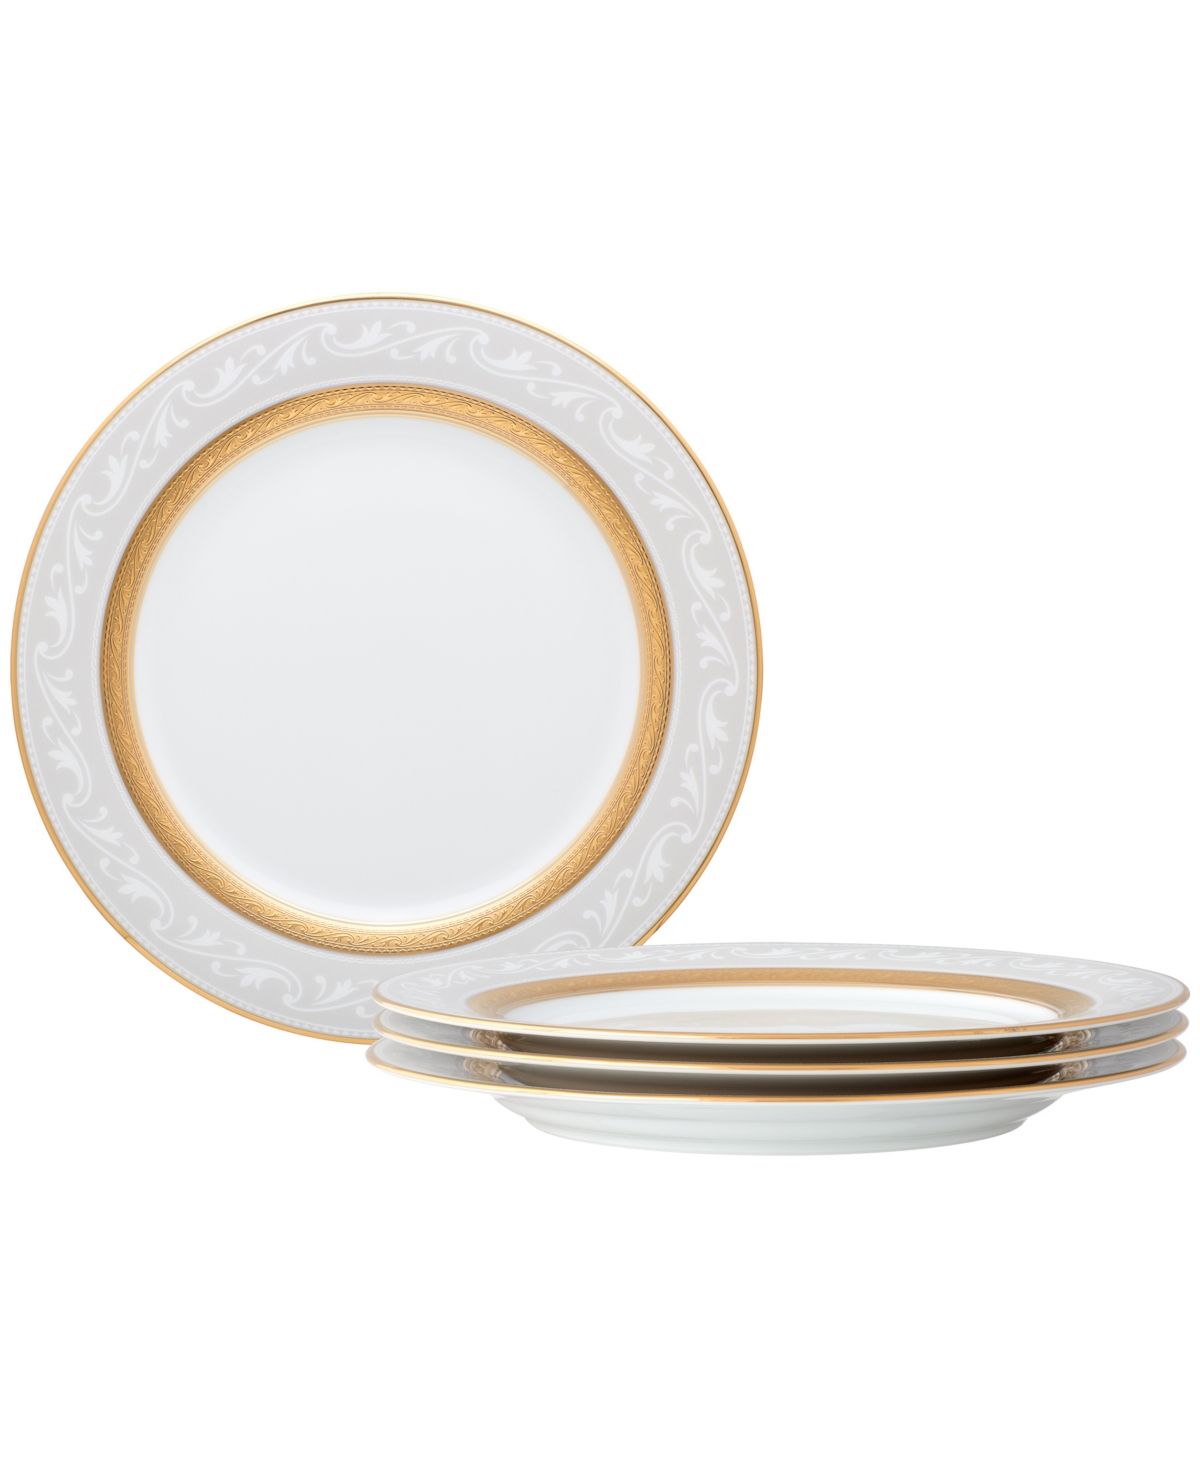 Noritake Crestwood Gold Set Of 4 Accent Plates, Service For 4 In White